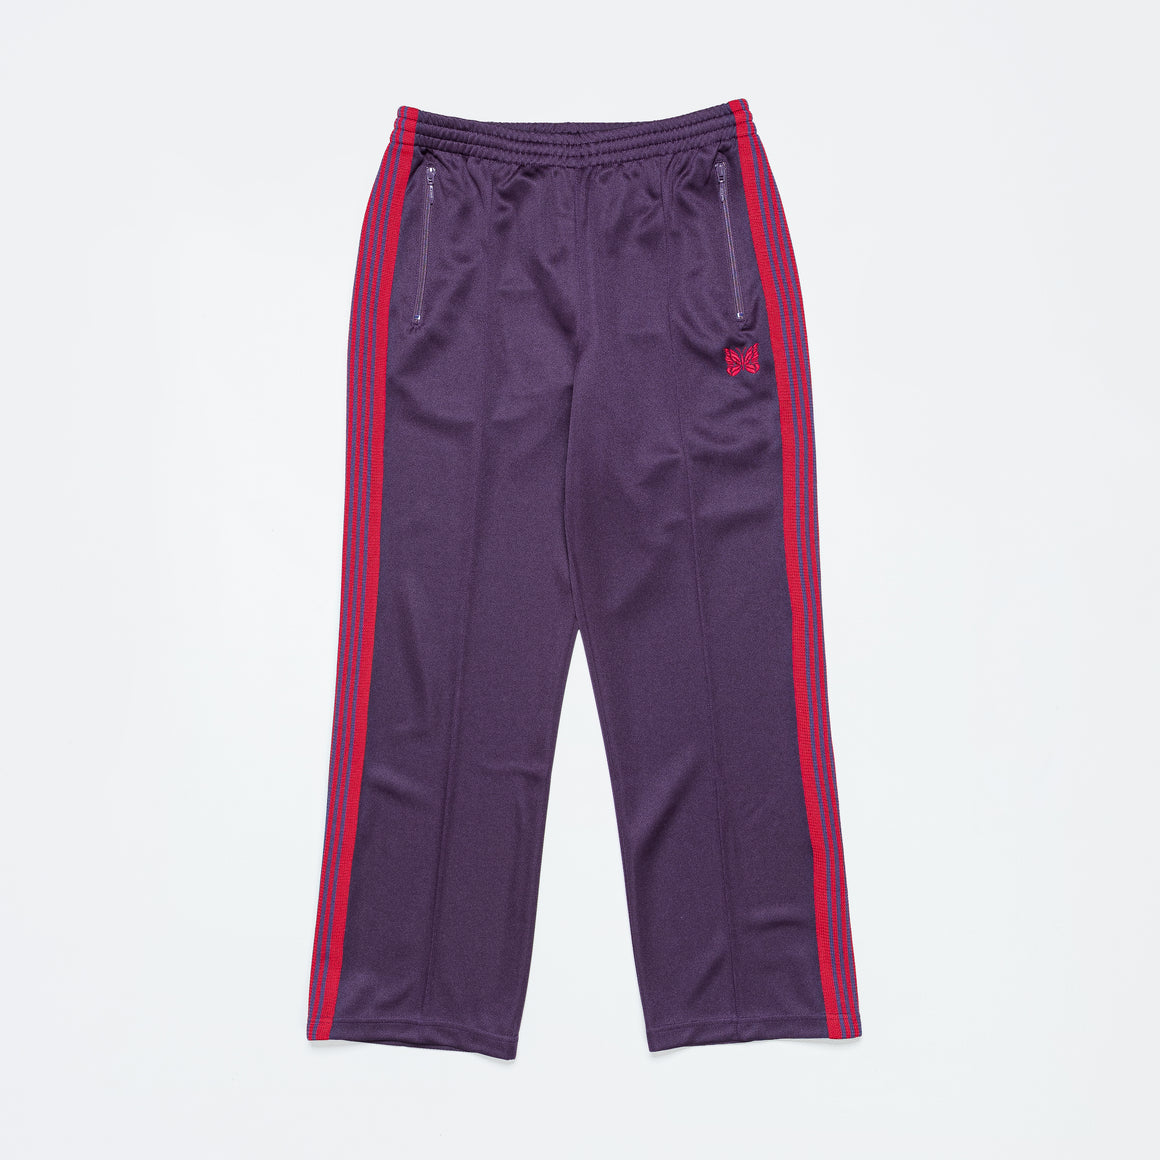 Track Pant - Dk. Purple Poly Smooth